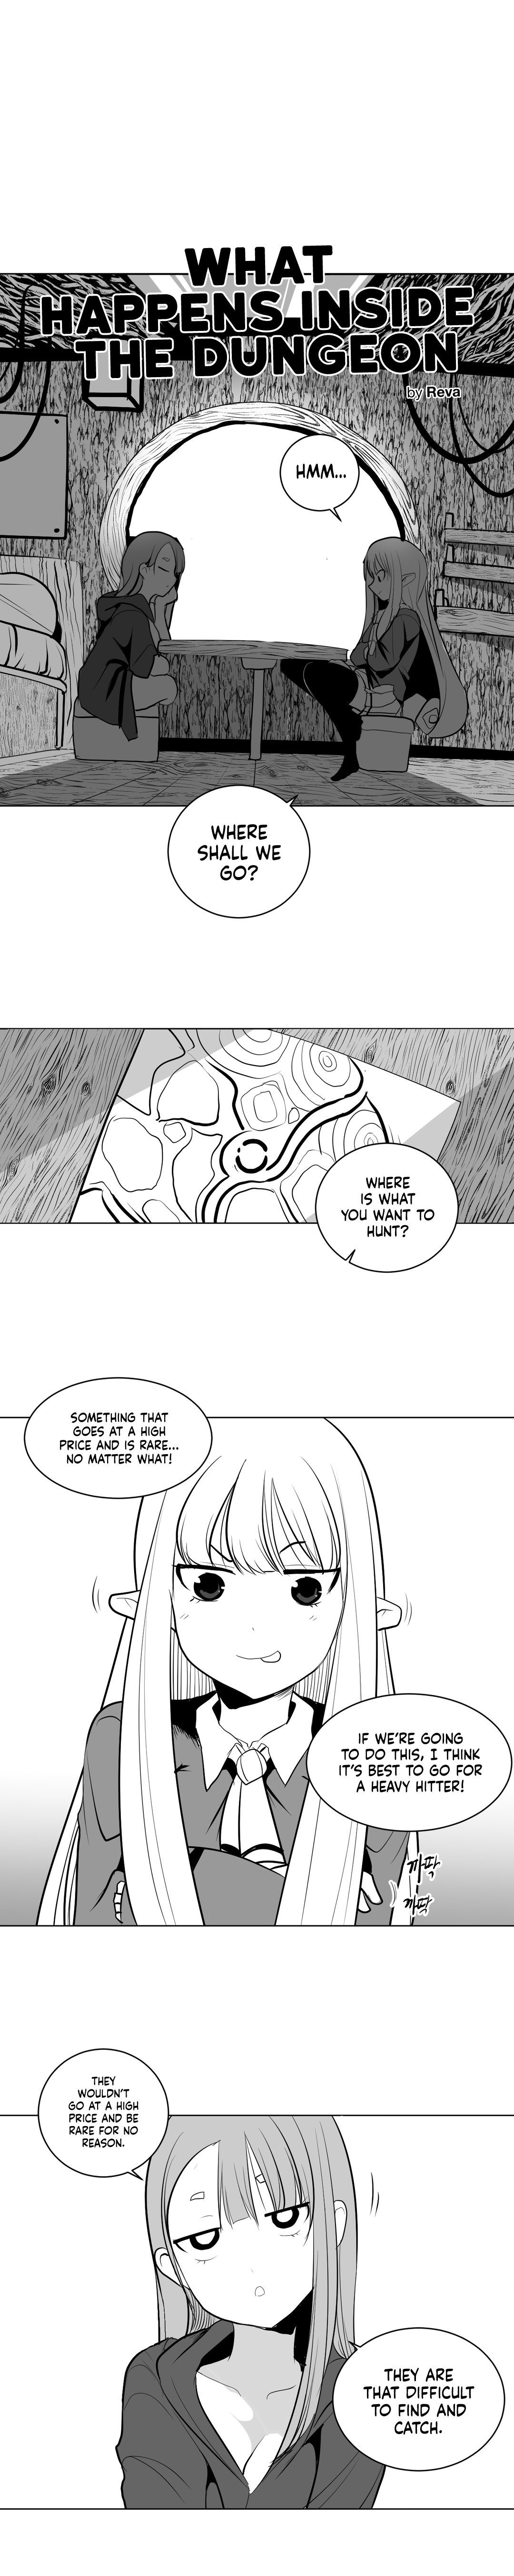 What Happens Inside The Dungeon - Page 4